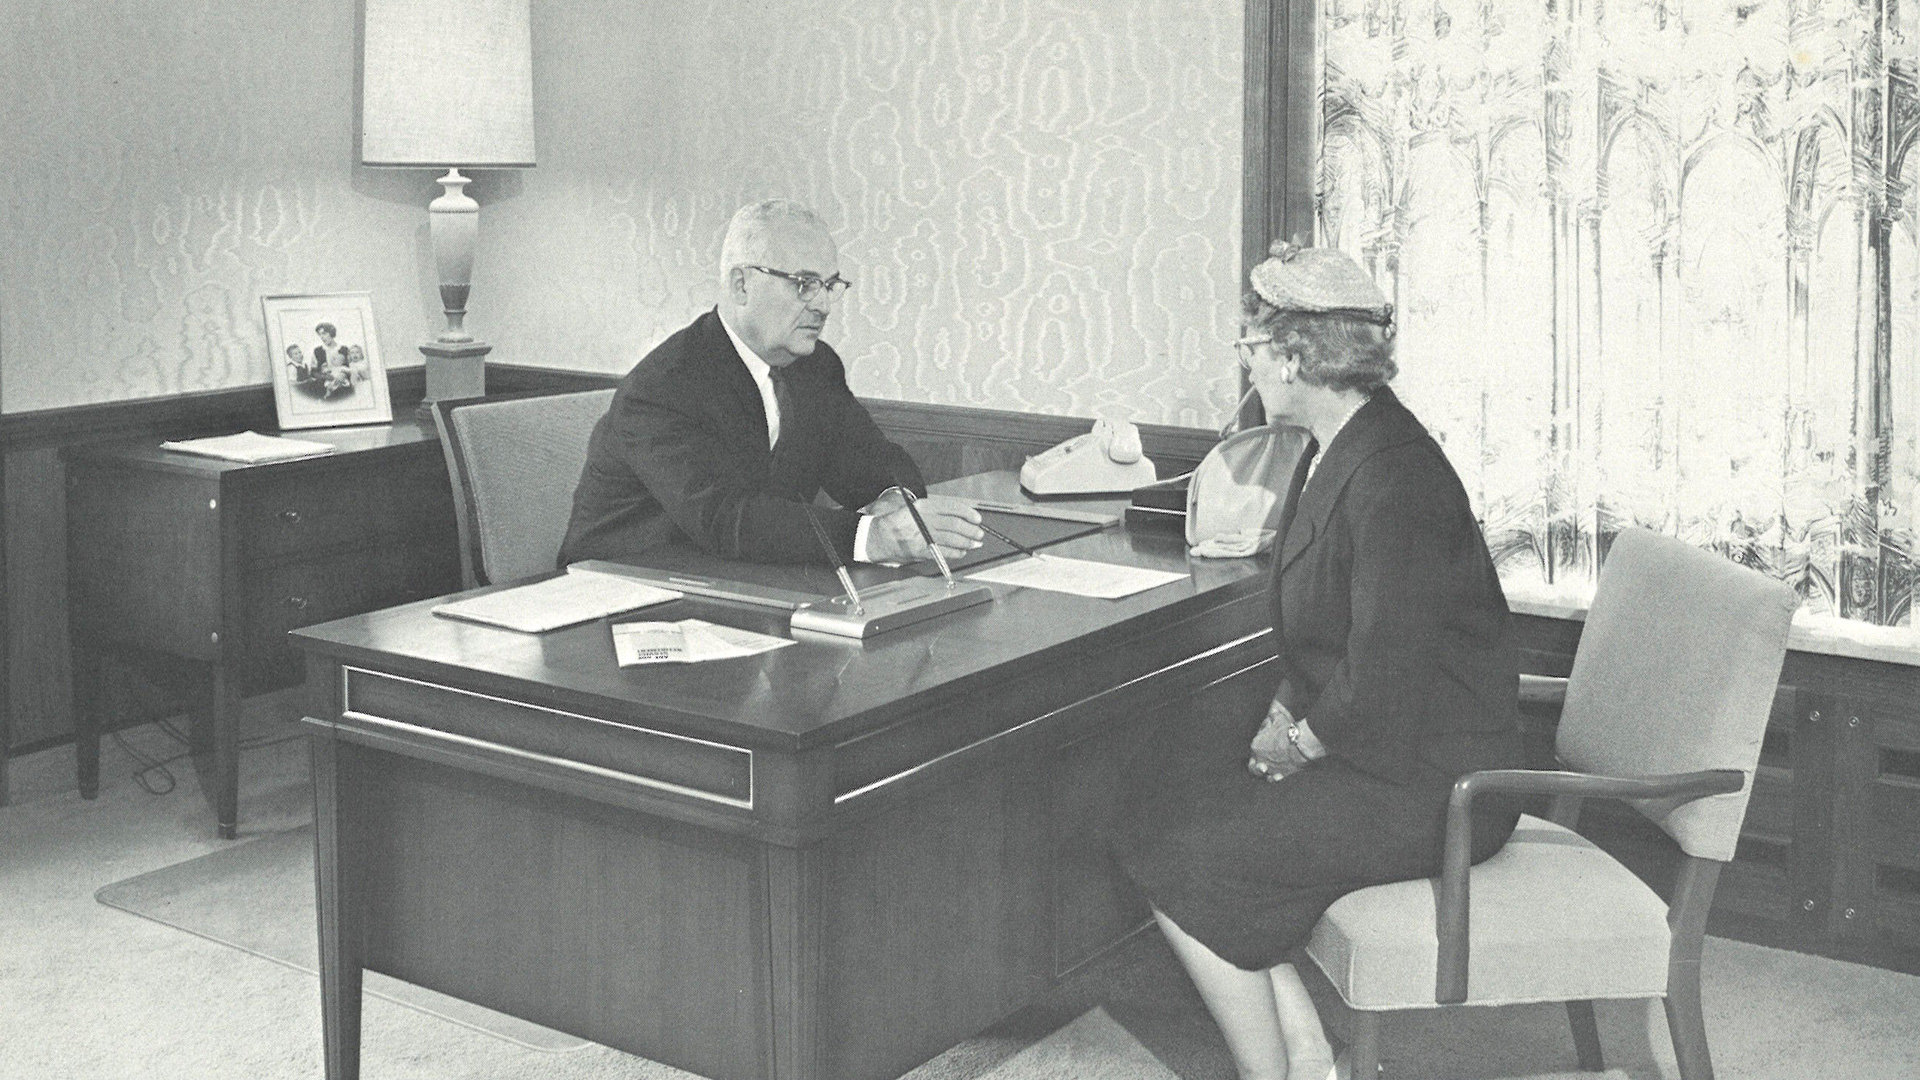 STRS Ohio benefits counseling session in 1962